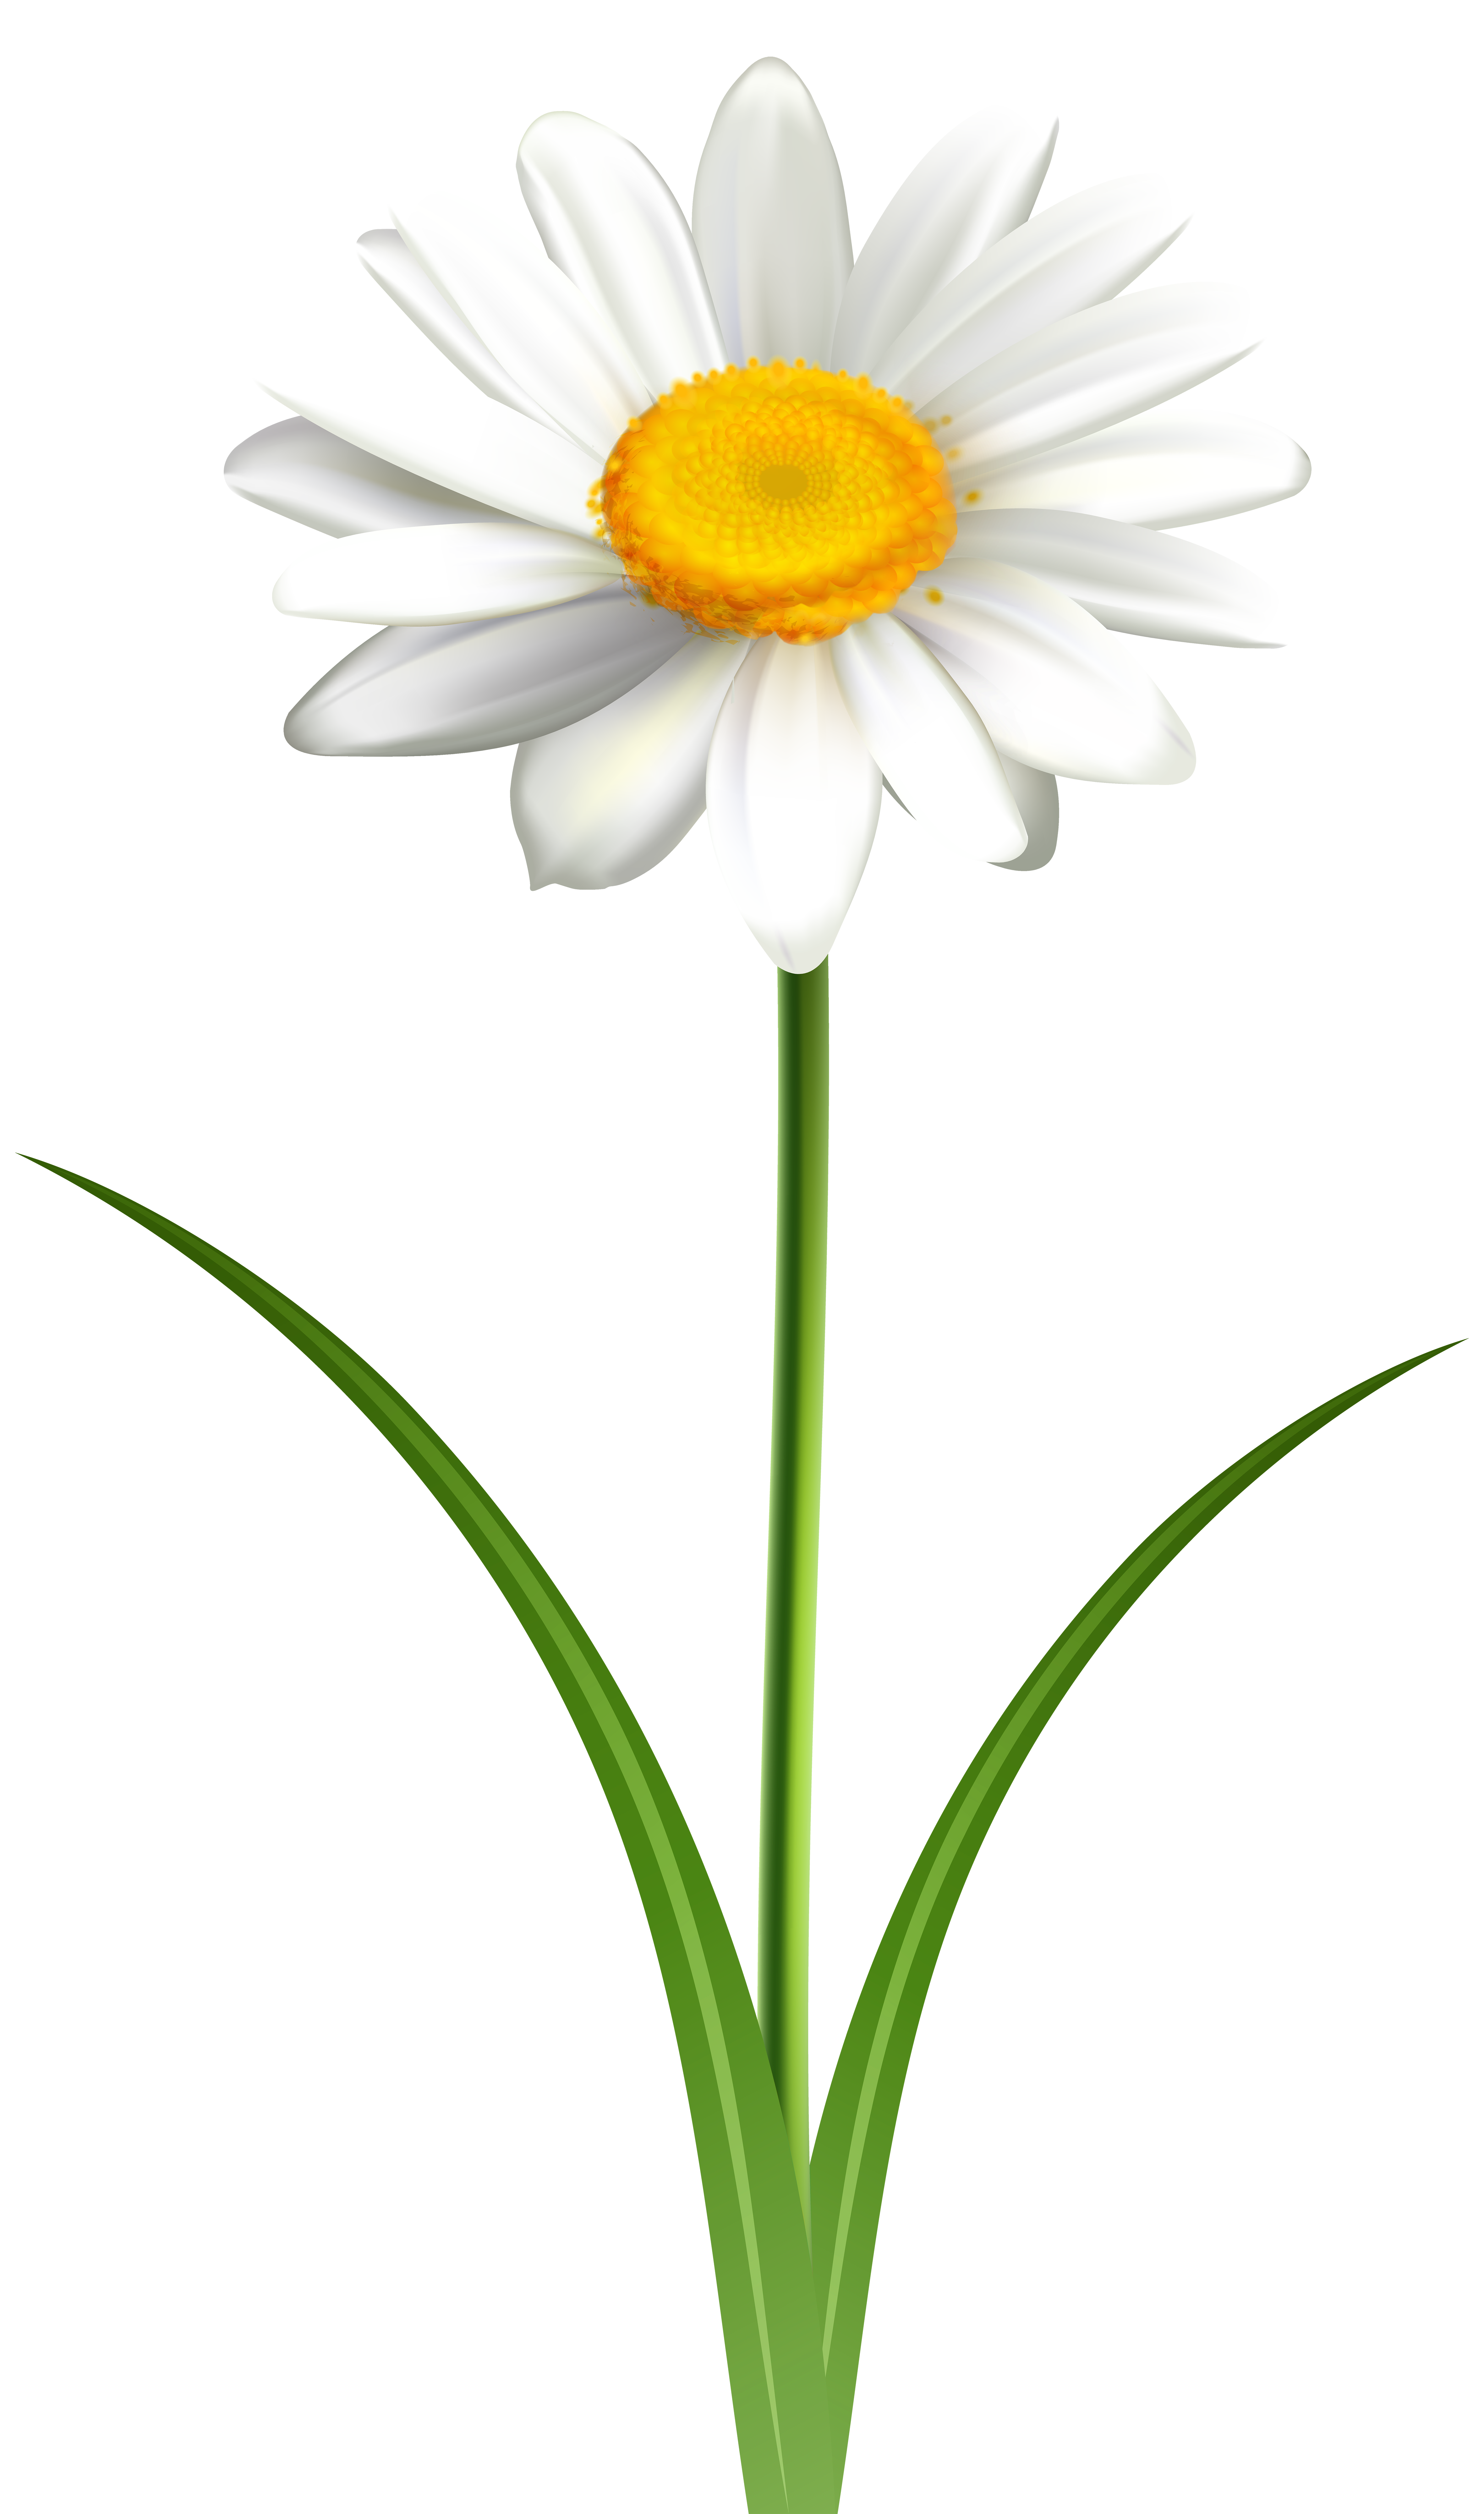 Daisies clipart flowr Daisies flowr Transparent FREE for 